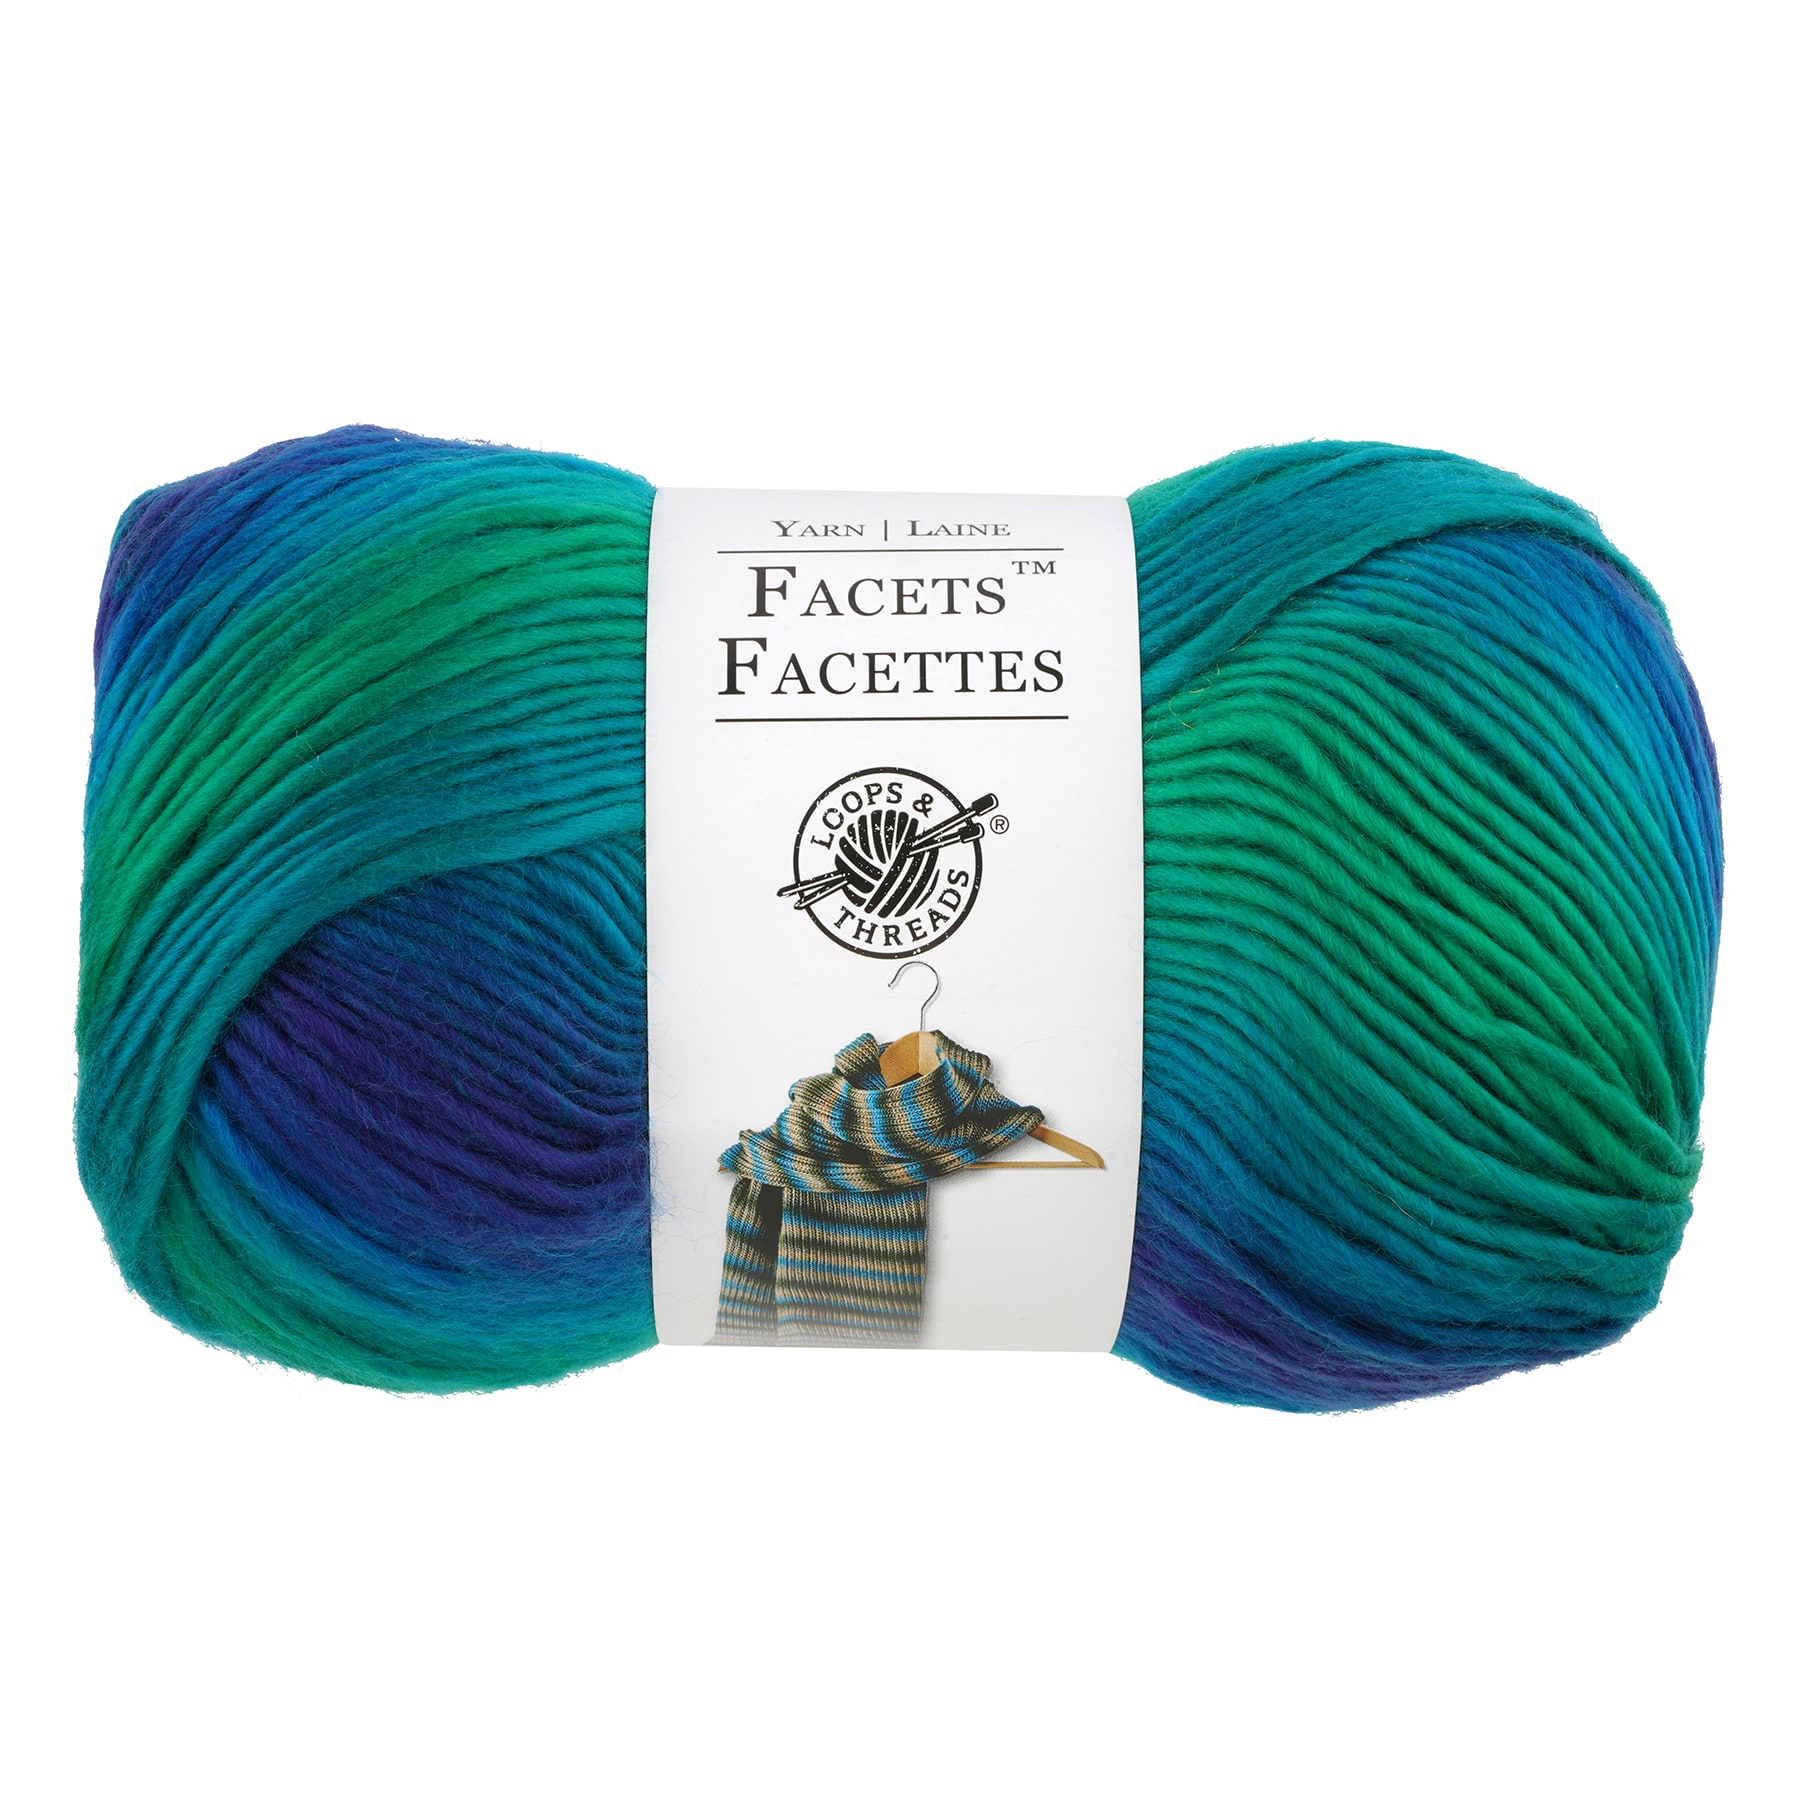 Loops & Threads Facets, NICOLA KNITS